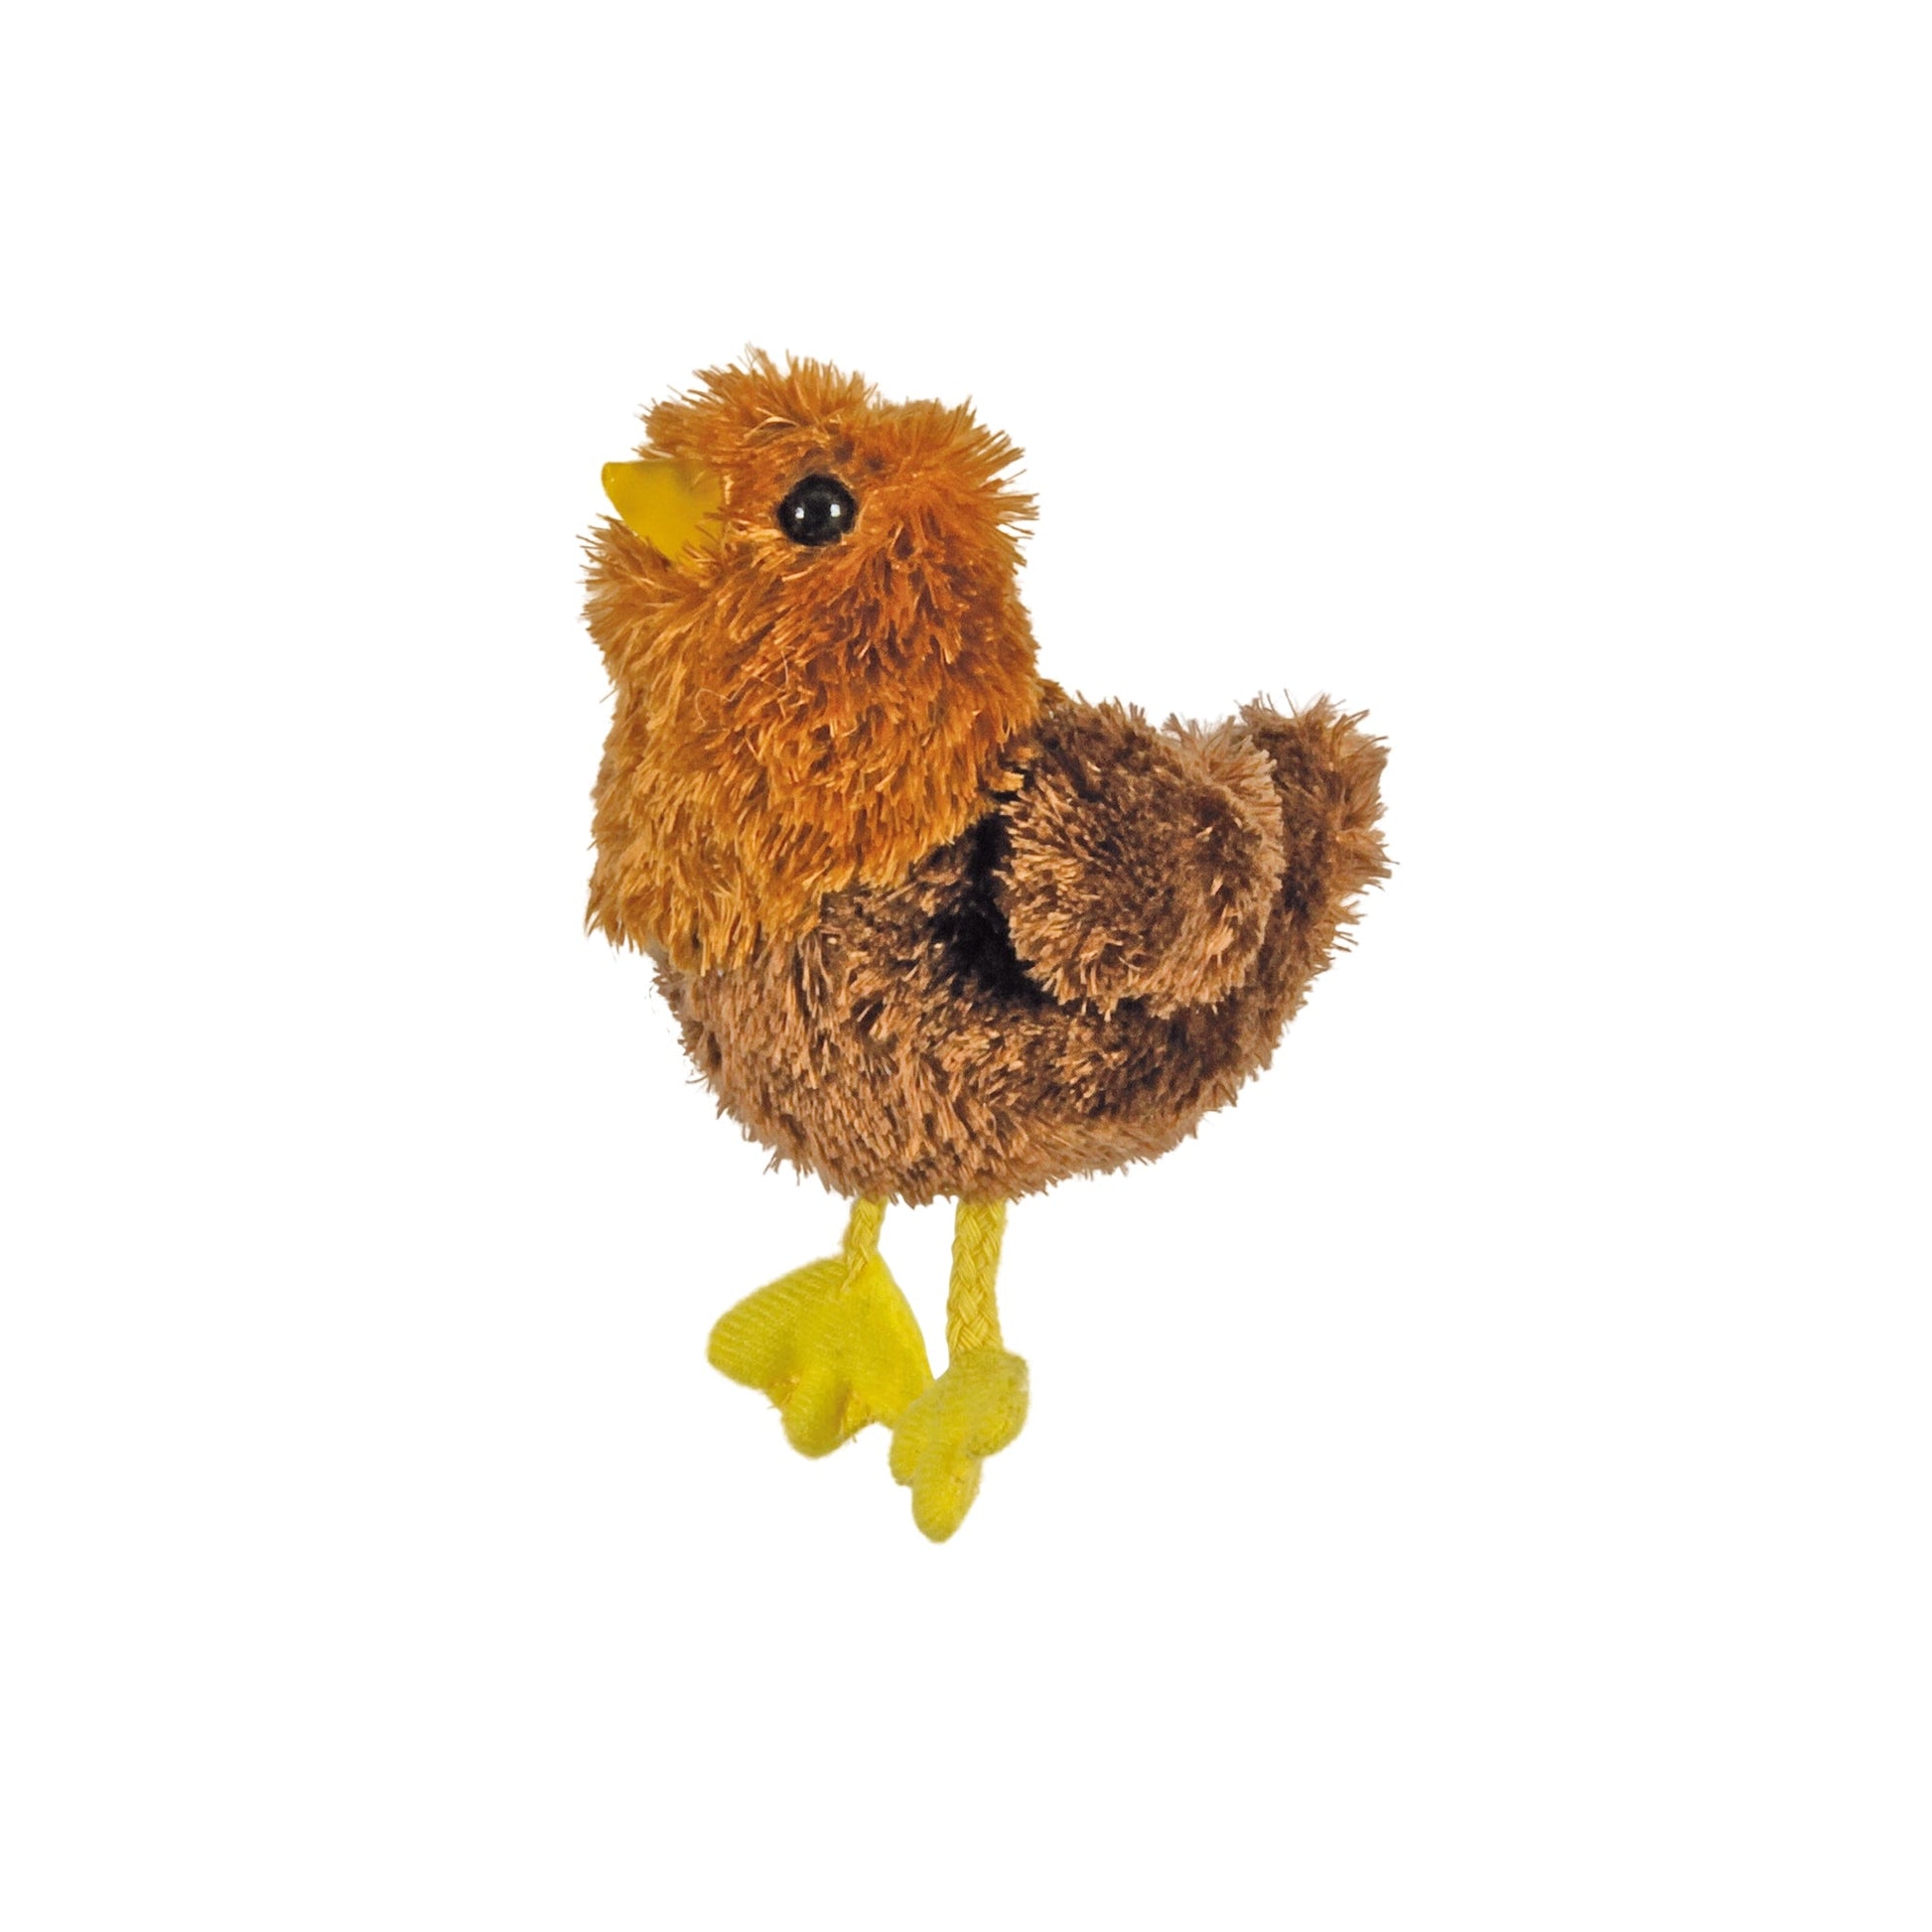 Hen Finger Puppet - The Puppet Company - The Forgotten Toy Shop